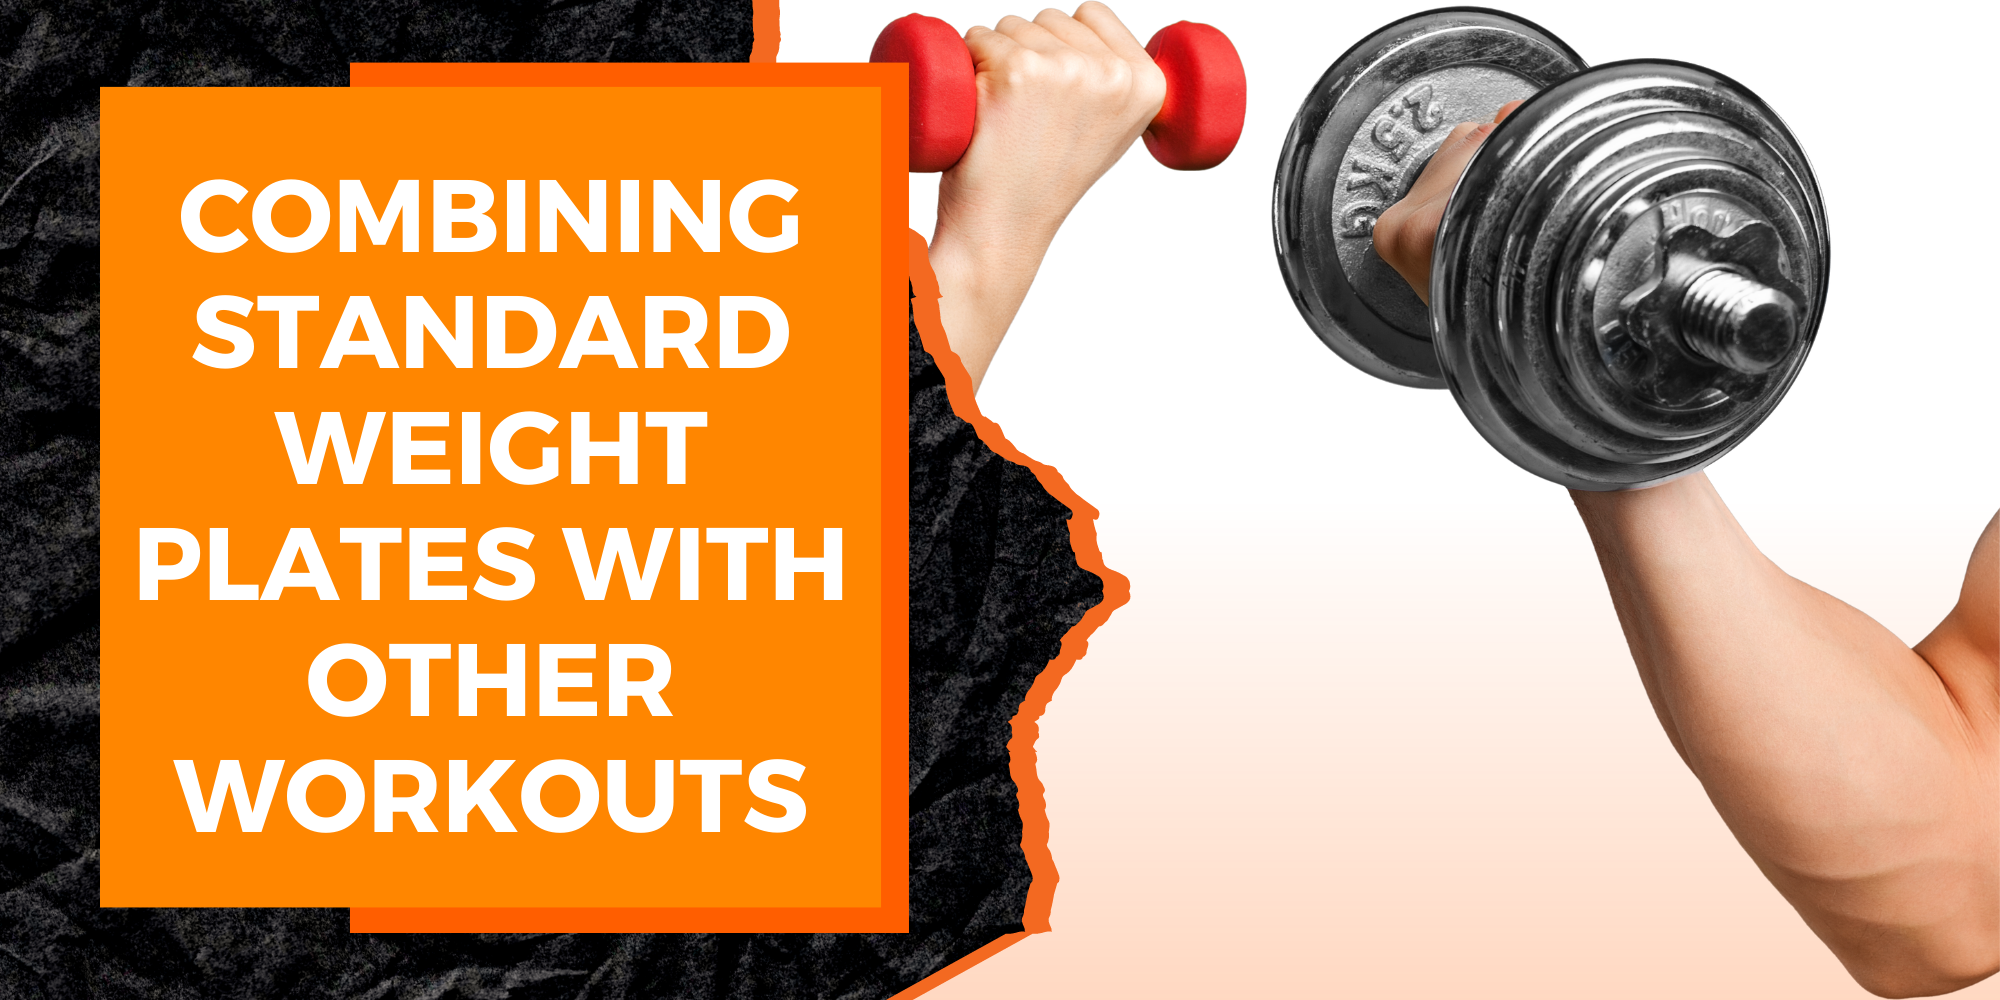 Combining Standard Weight Plates with Other Workouts